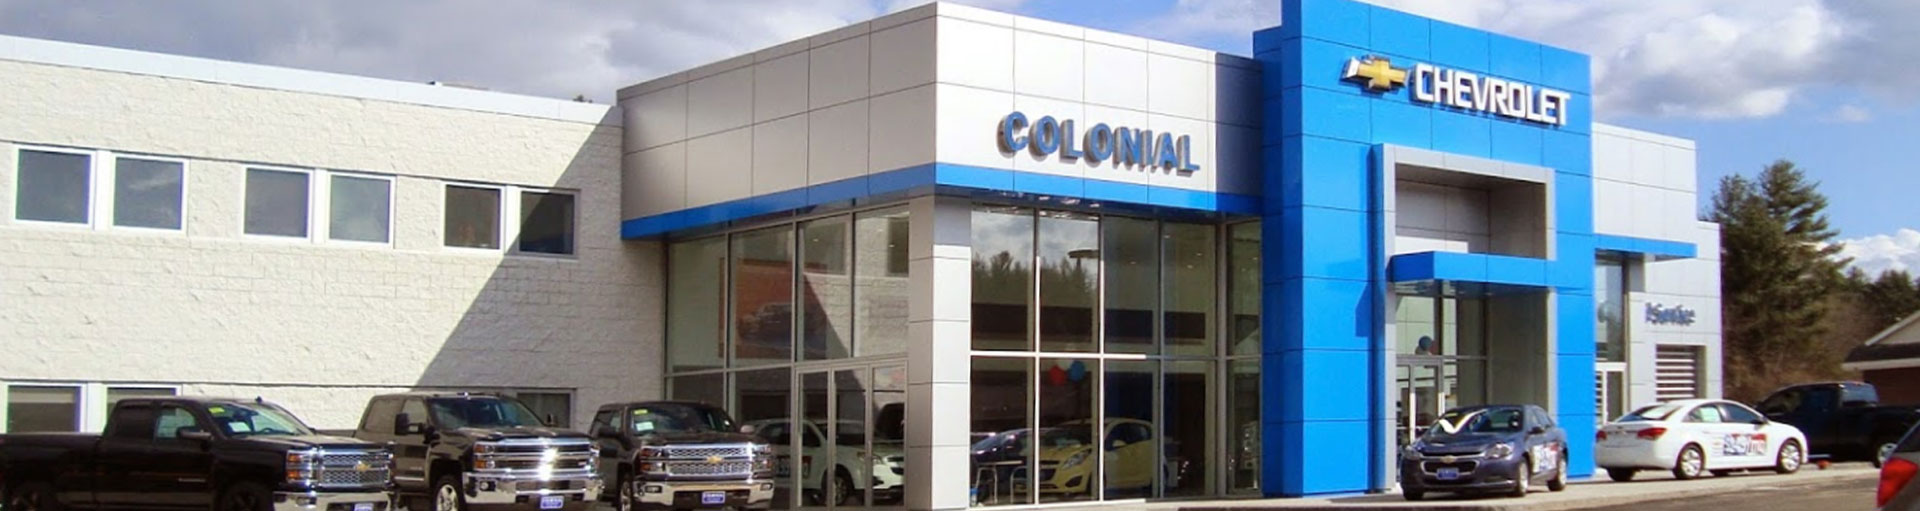 Colonial Chevrolet of Acton Brake Services